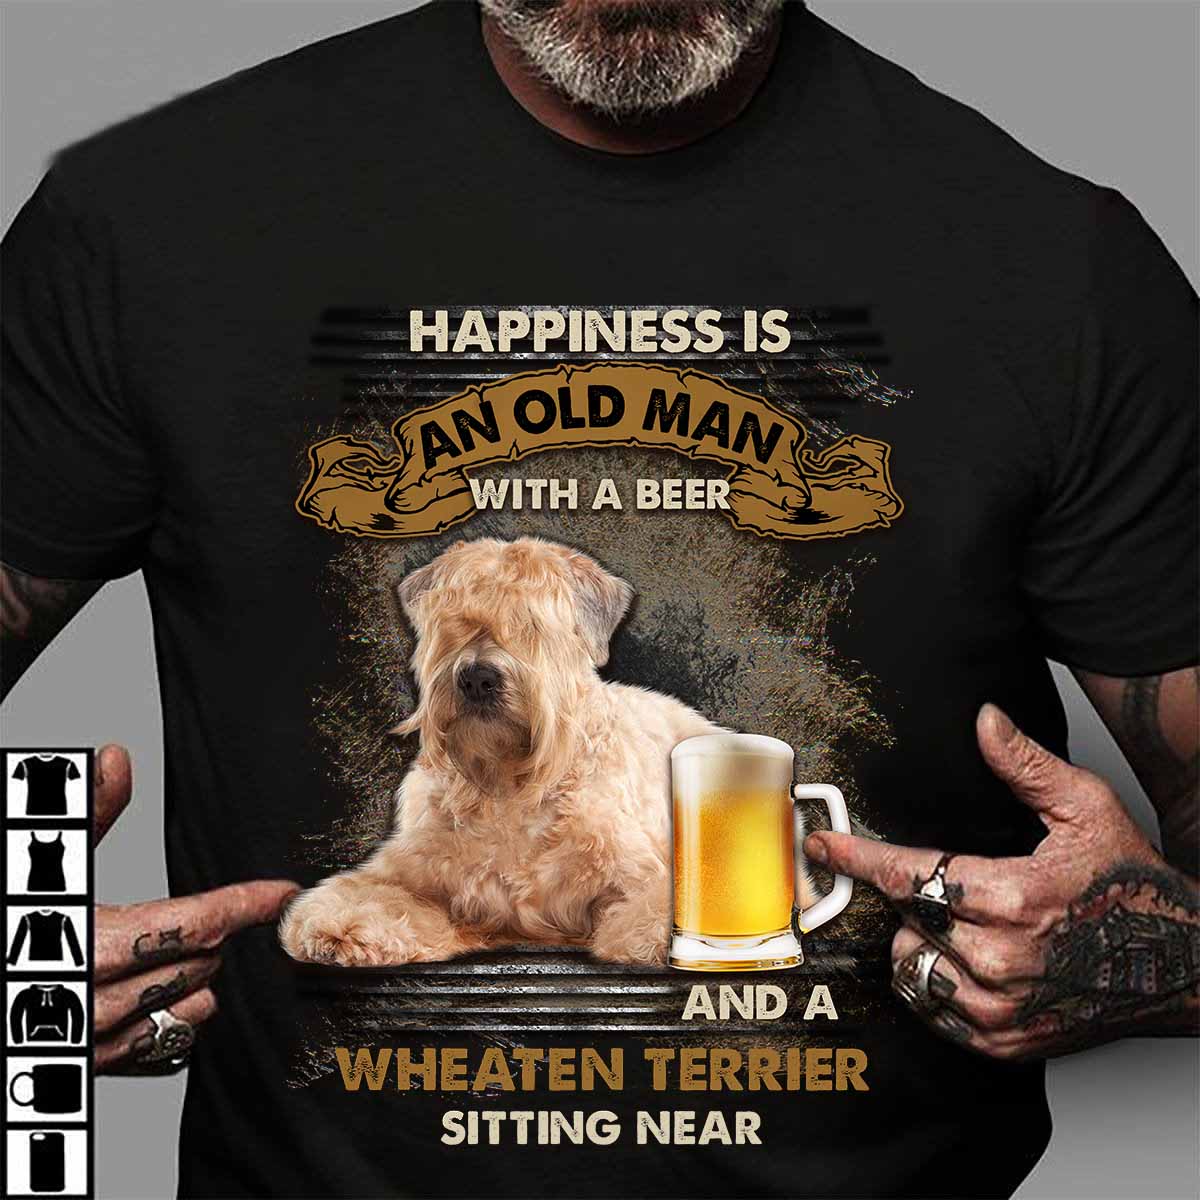 Happiness is an old man with a beer and a wheaten terrier sitting near - Beer lover